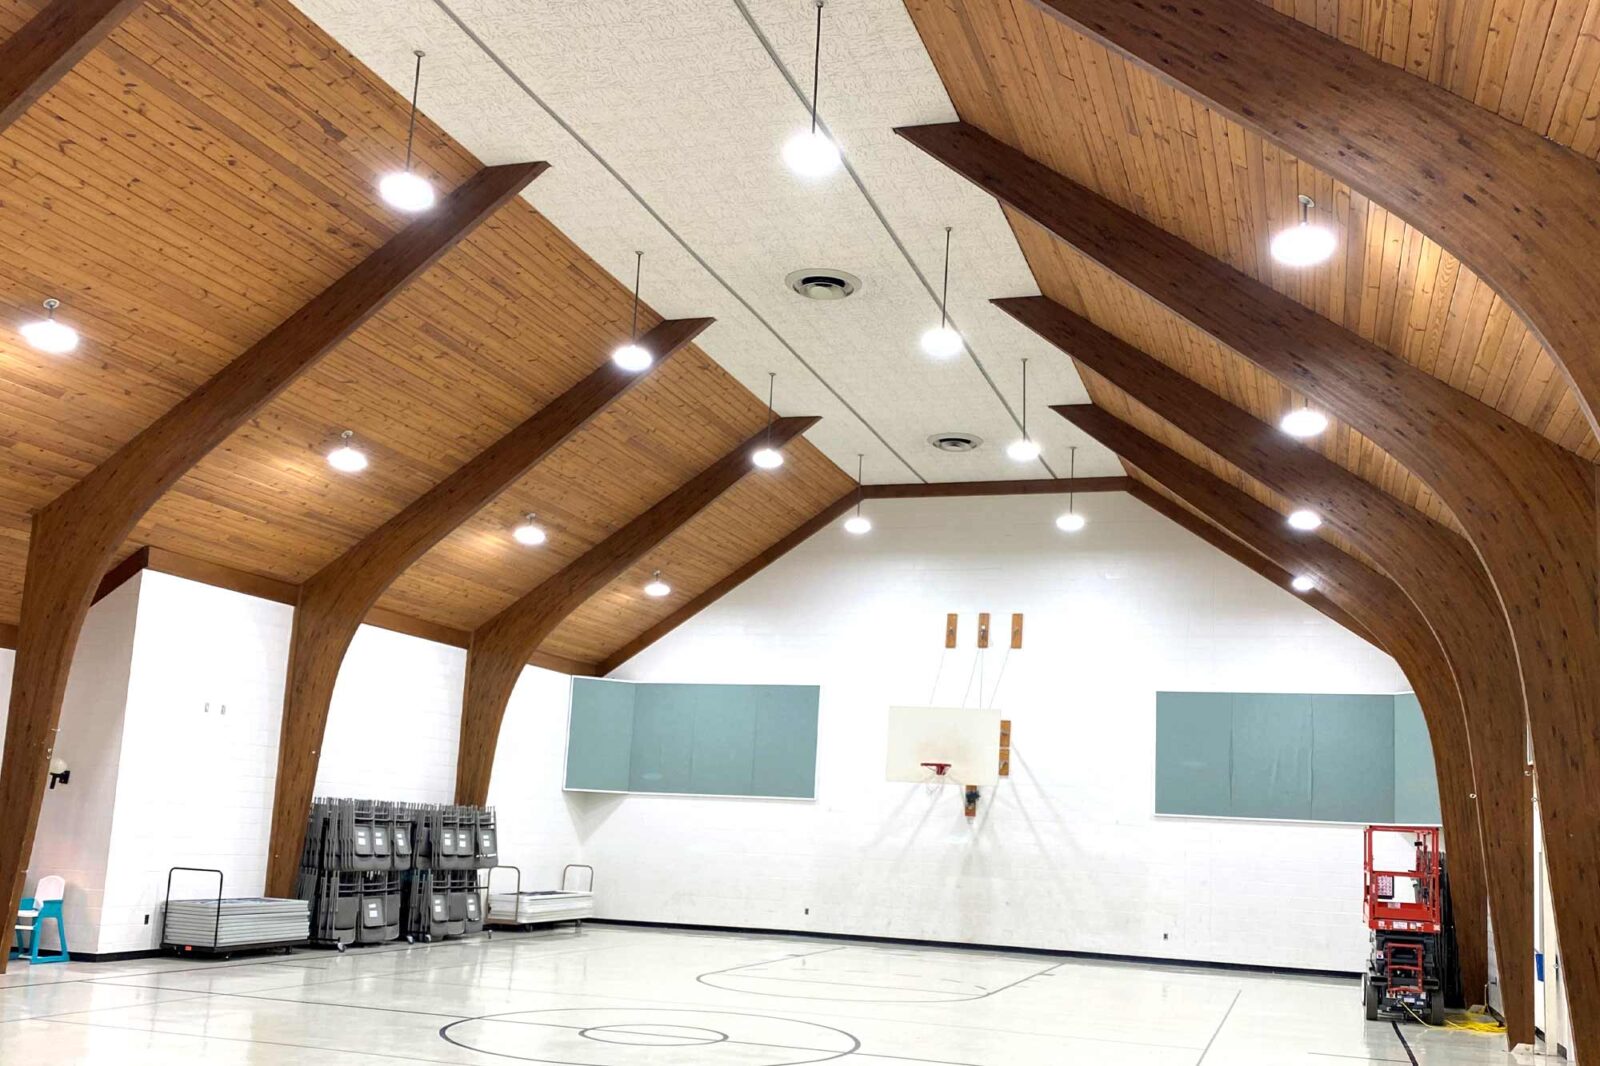 LED High Bay lighting installed in a gymnasium.